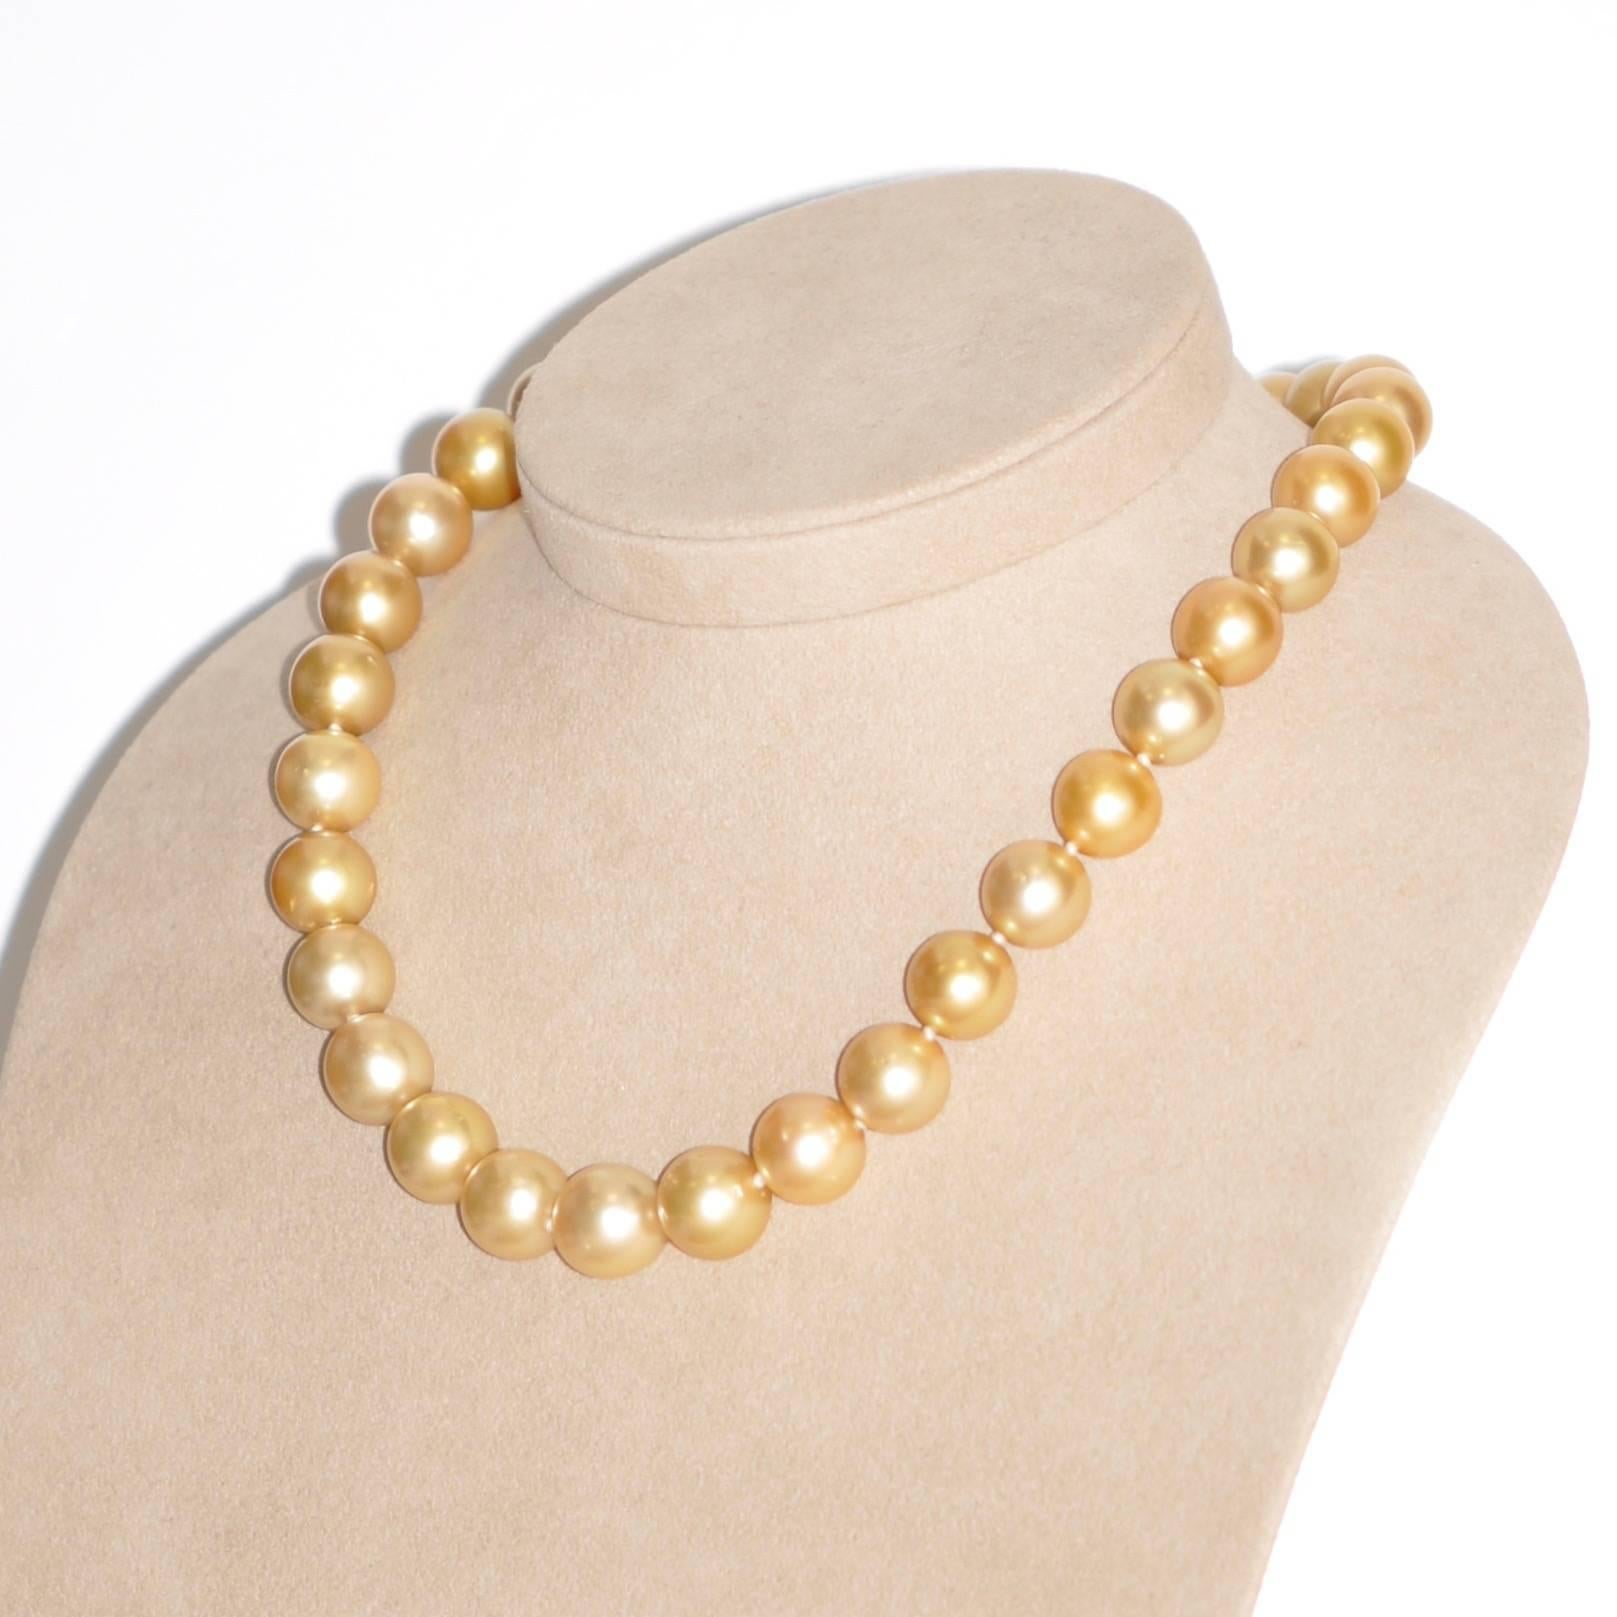 A magnificent necklace of golden South Sea pearls, a true masterpiece of the ocean that embodies elegance and sophistication. Composed of 32 golden South Sea pearls measuring 14/12 mm, each one is unique, reflecting the natural beauty of the